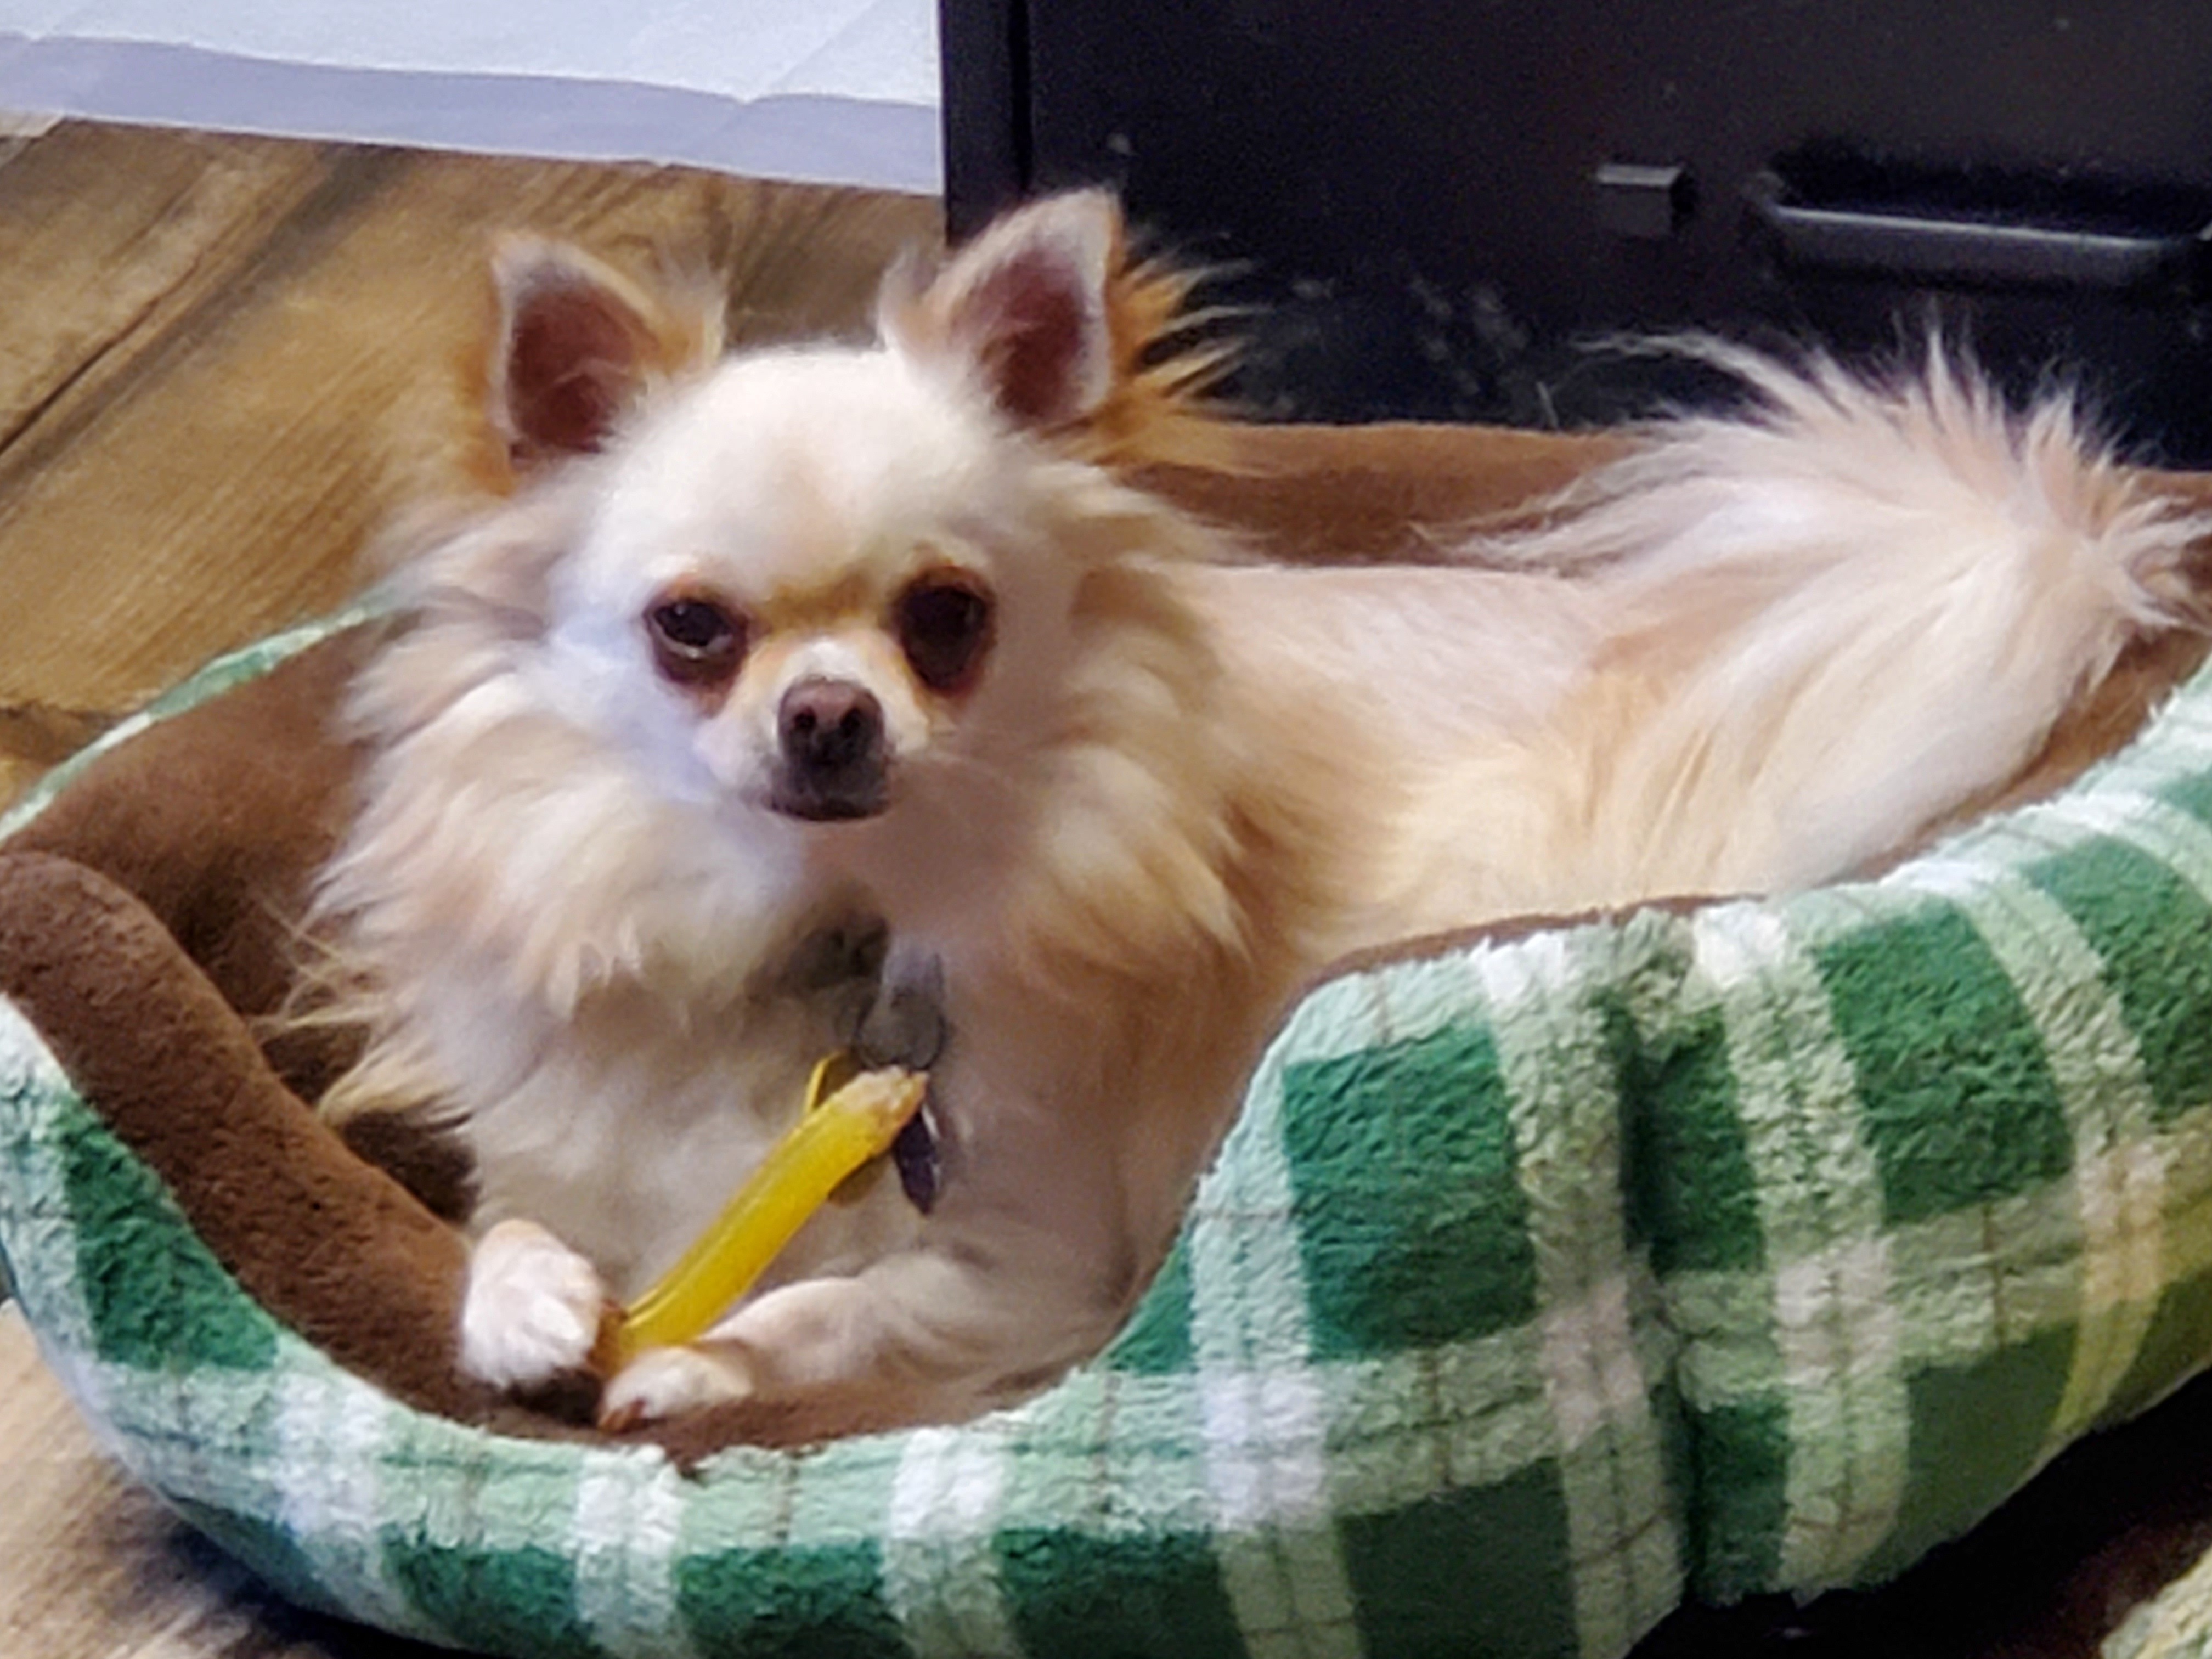 Lucy and Winston, an adoptable Chihuahua in Chatham, ON, N7M 2Z7 | Photo Image 1